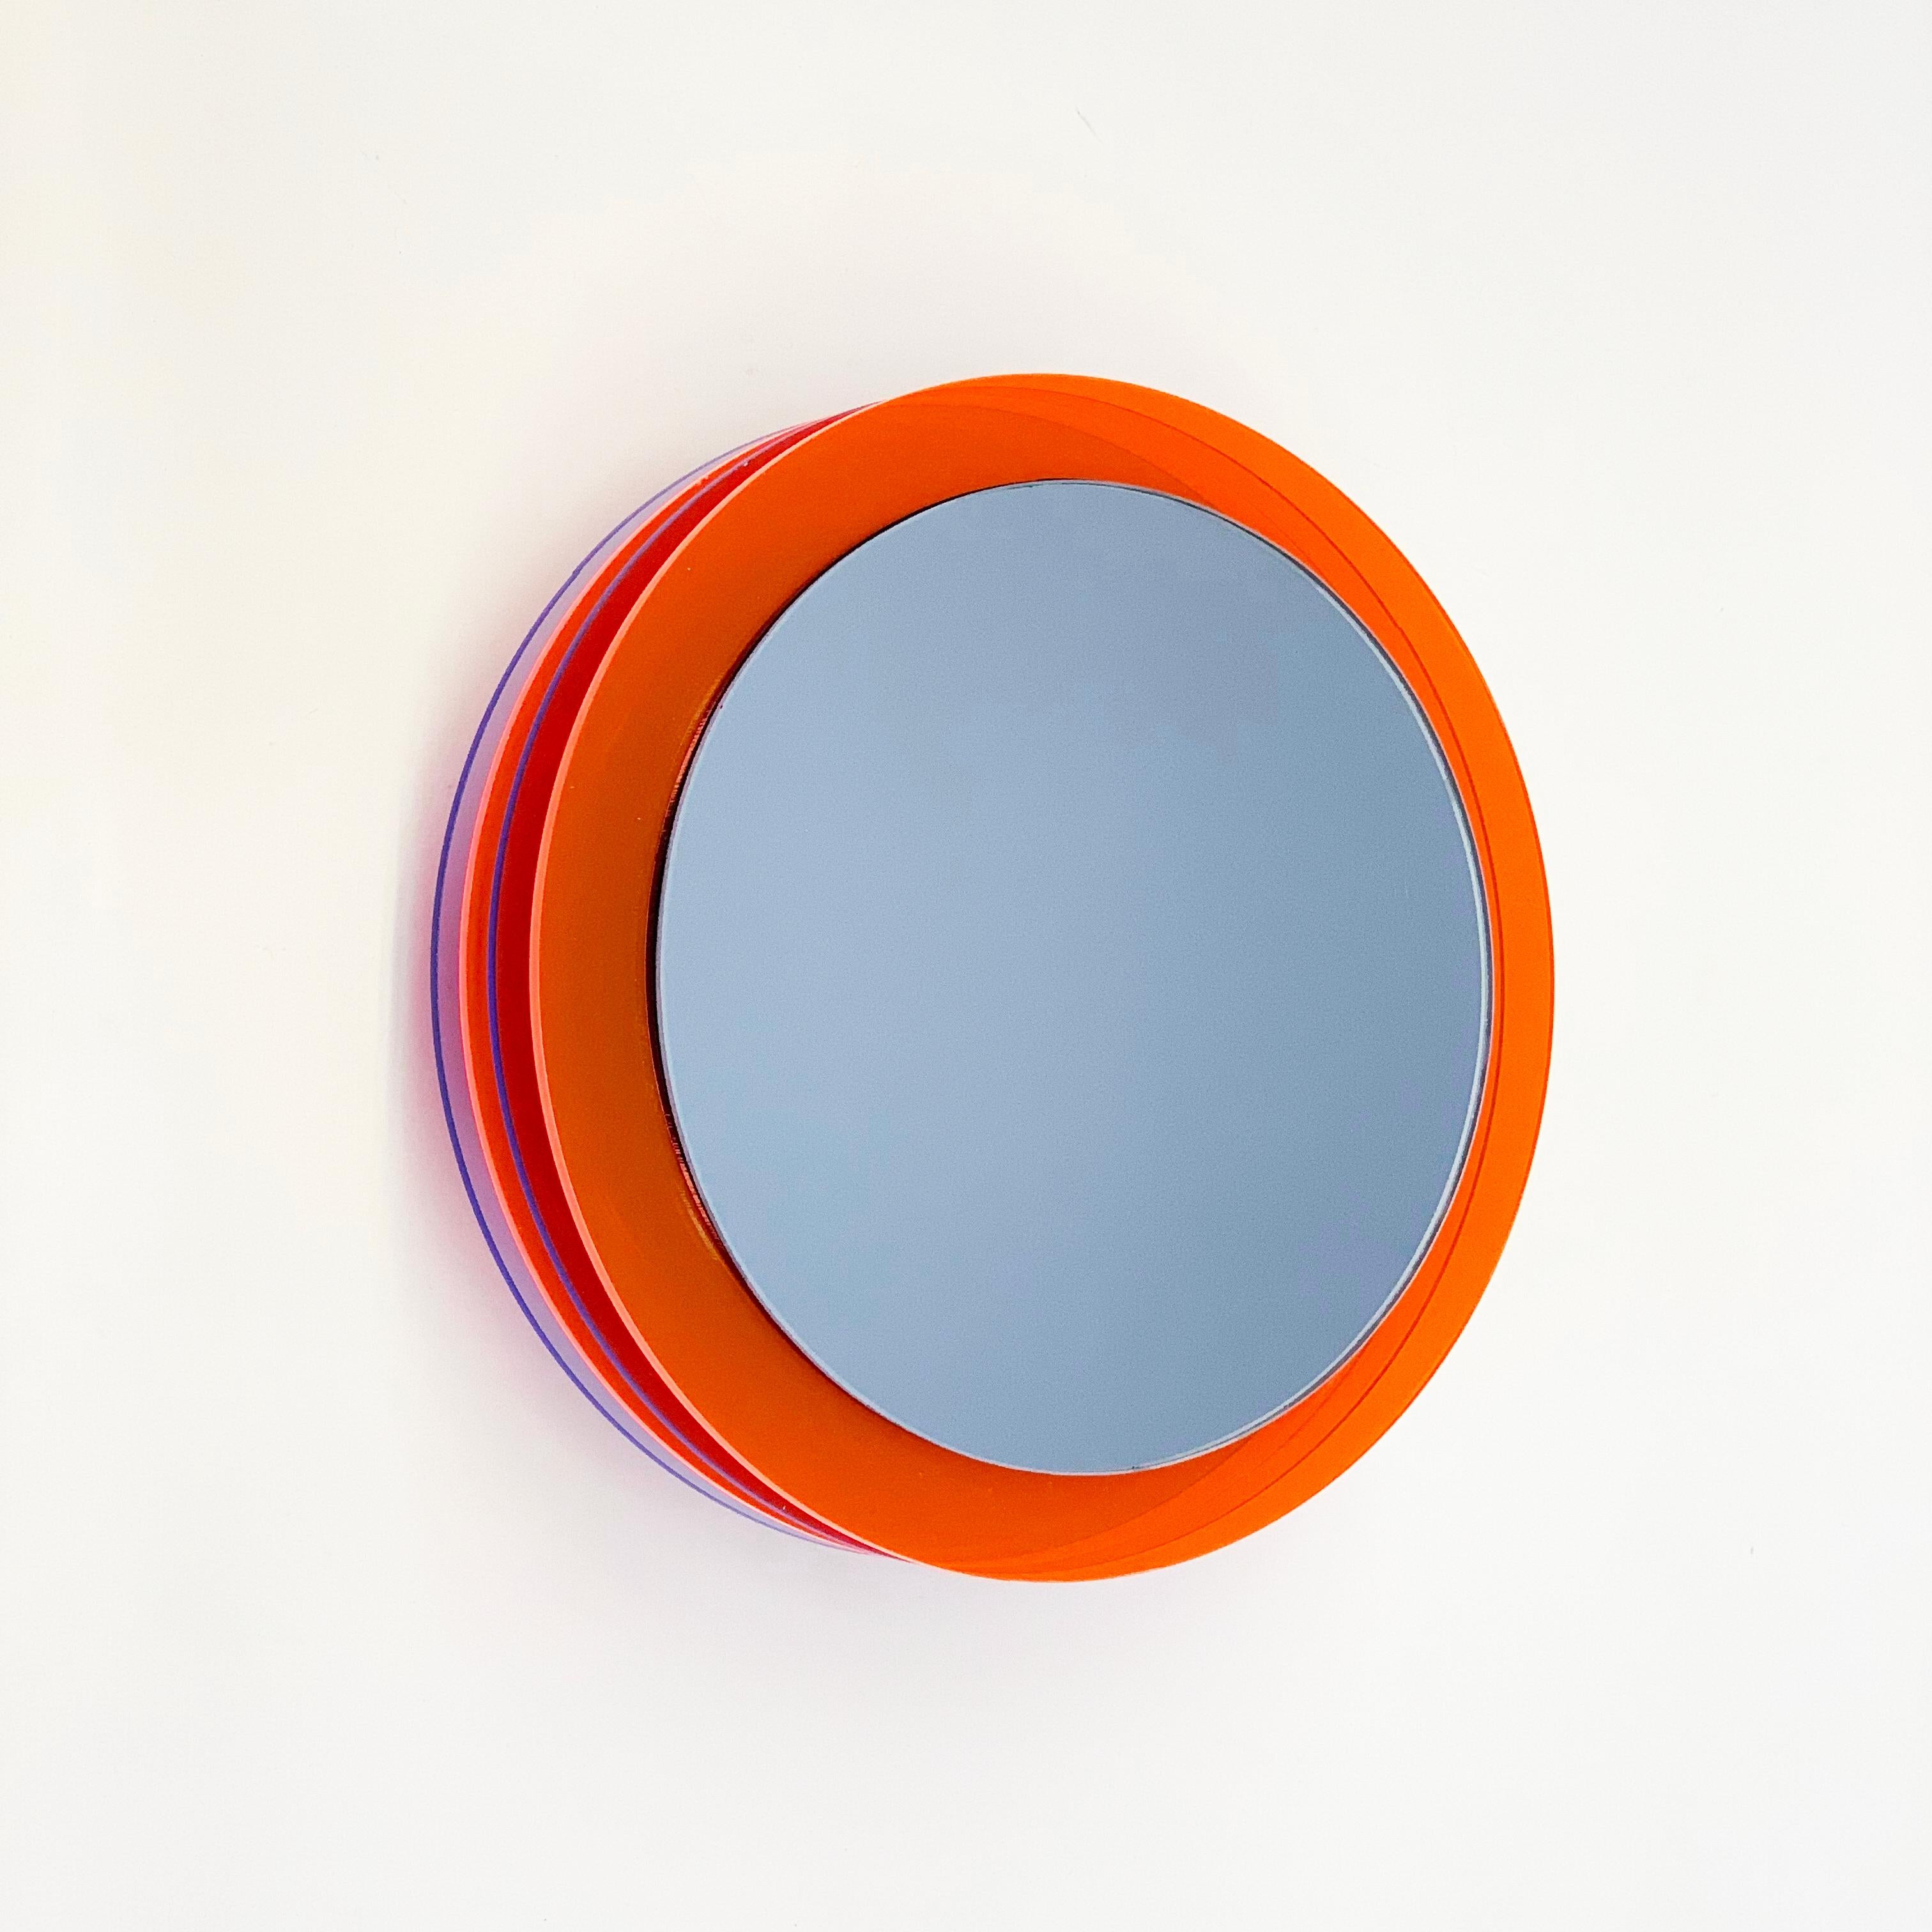 German Daddy - wall mirror with plexiglass, design sculpture by Andreas Berlin